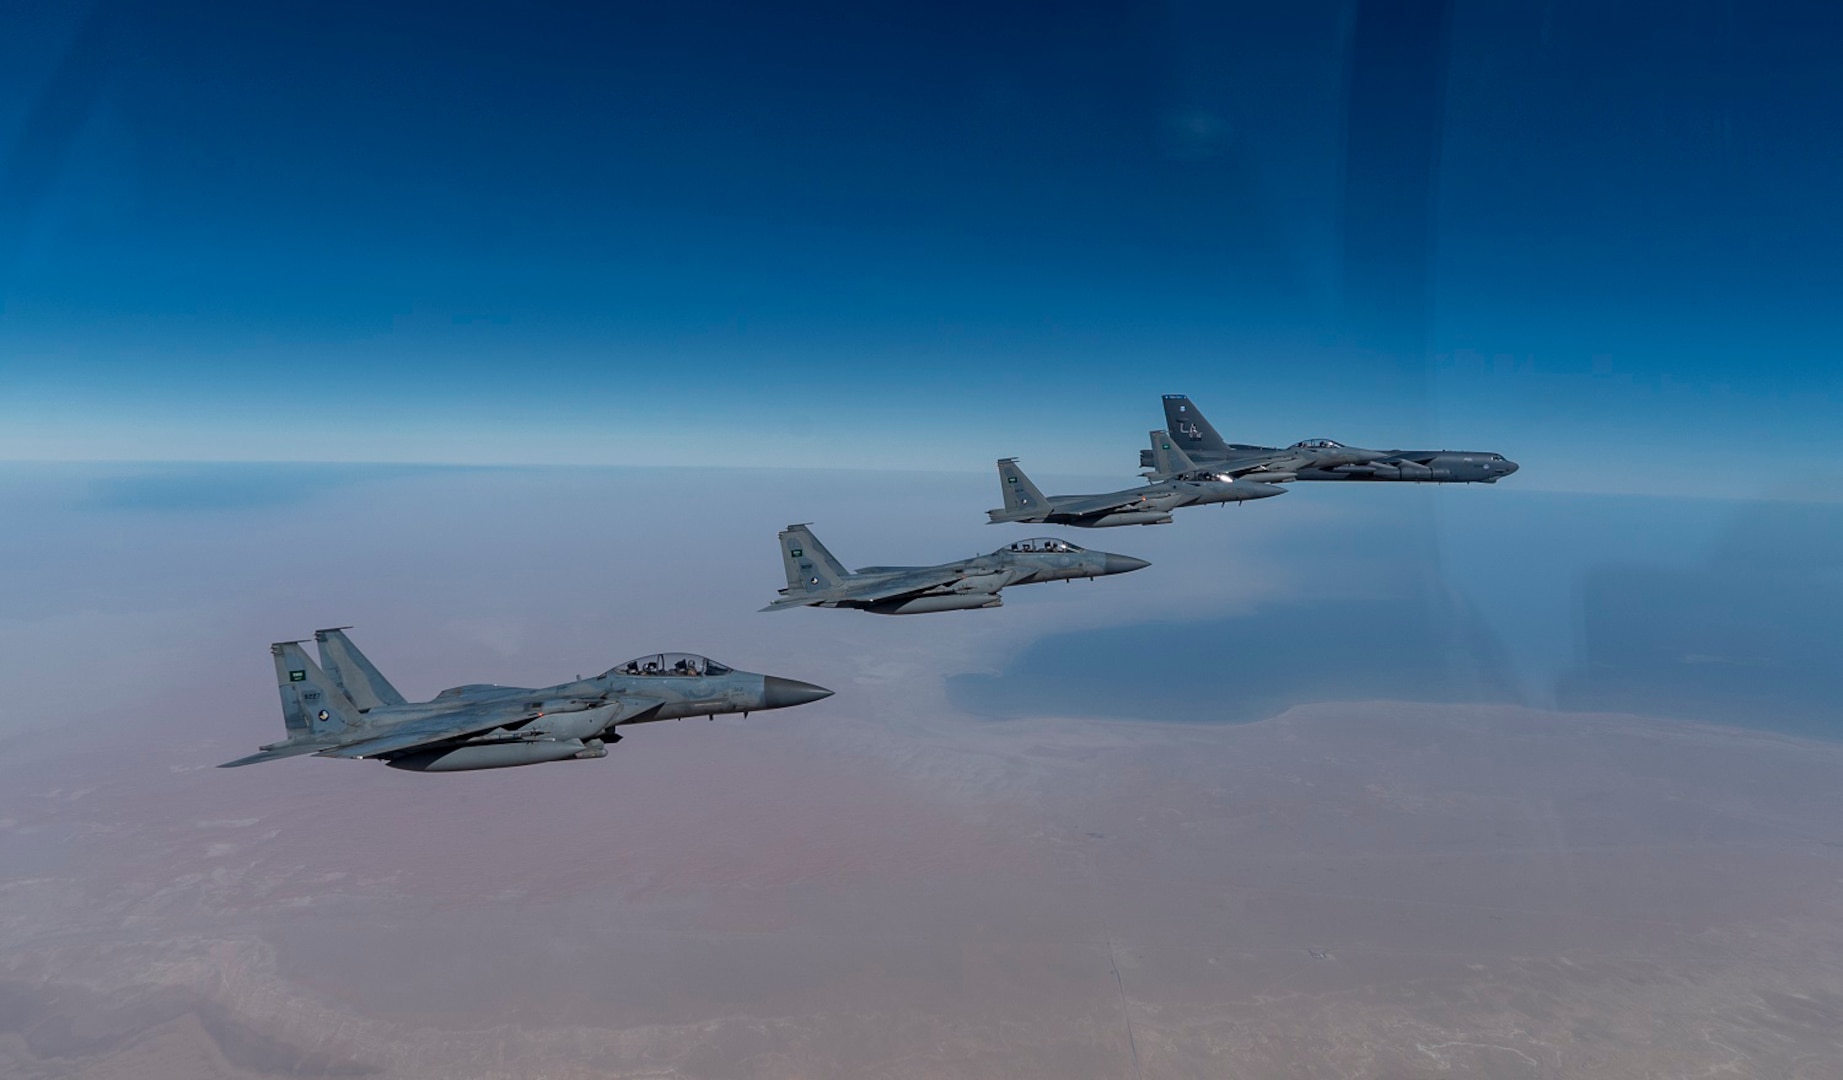 A U.S. Air Force B-52 Stratofortress  from the 2nd Bomb Wing, Barksdale Air Force Base, LA, flew with Royal Saudi Arabian Air Force F-15SAs during a bomber task force mission over the U.S. Central Command area of responsibility, Jan. 27, 2021. The bomber deployment underscores the U.S. Military's commitment to regional security and demonstrates a unique ability to rapidly deploy on short notice. The B-52 is a long-range, heavy bomber that is capable of flying at high subsonic speeds of altitudes of up to 50,000 feet and provides the United States with a global strike capability. (U.S. Air Force photo by Senior Airman Roslyn Ward)